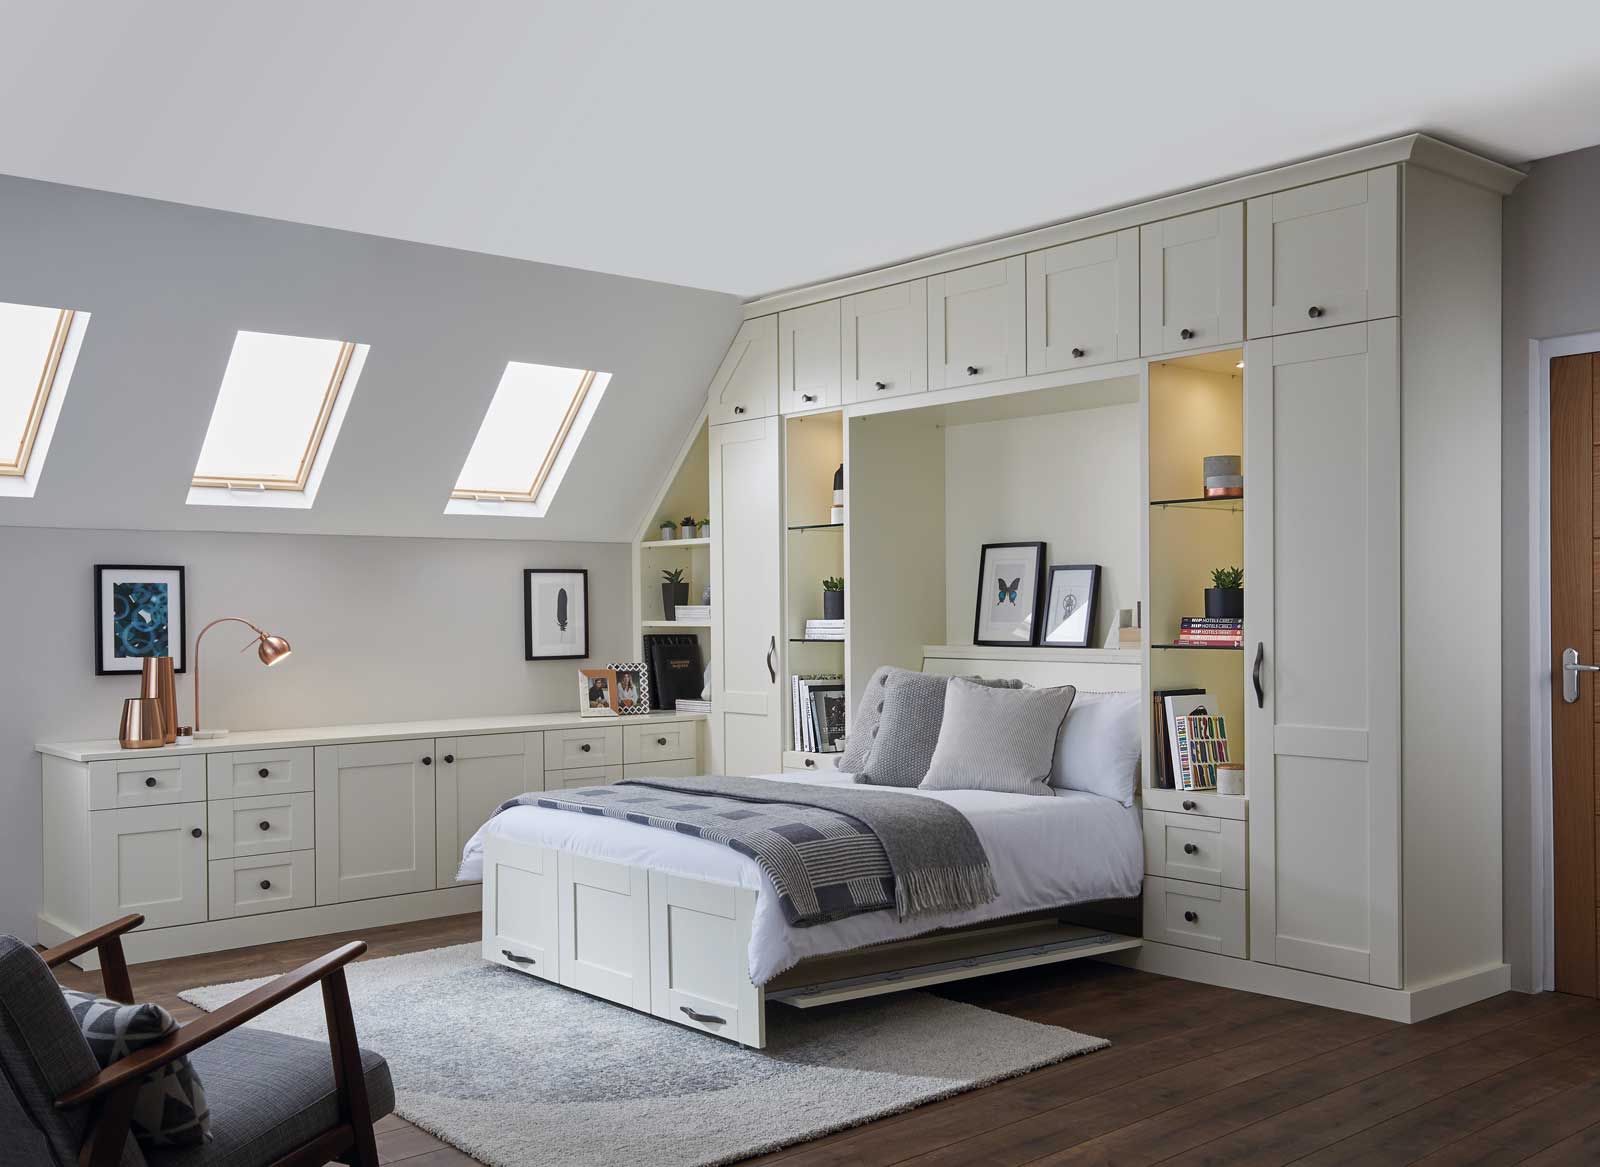 Space Saving Wall Beds | Pull Down & Fold Away Beds | Strachan Intended For Wardrobes Beds (View 3 of 15)